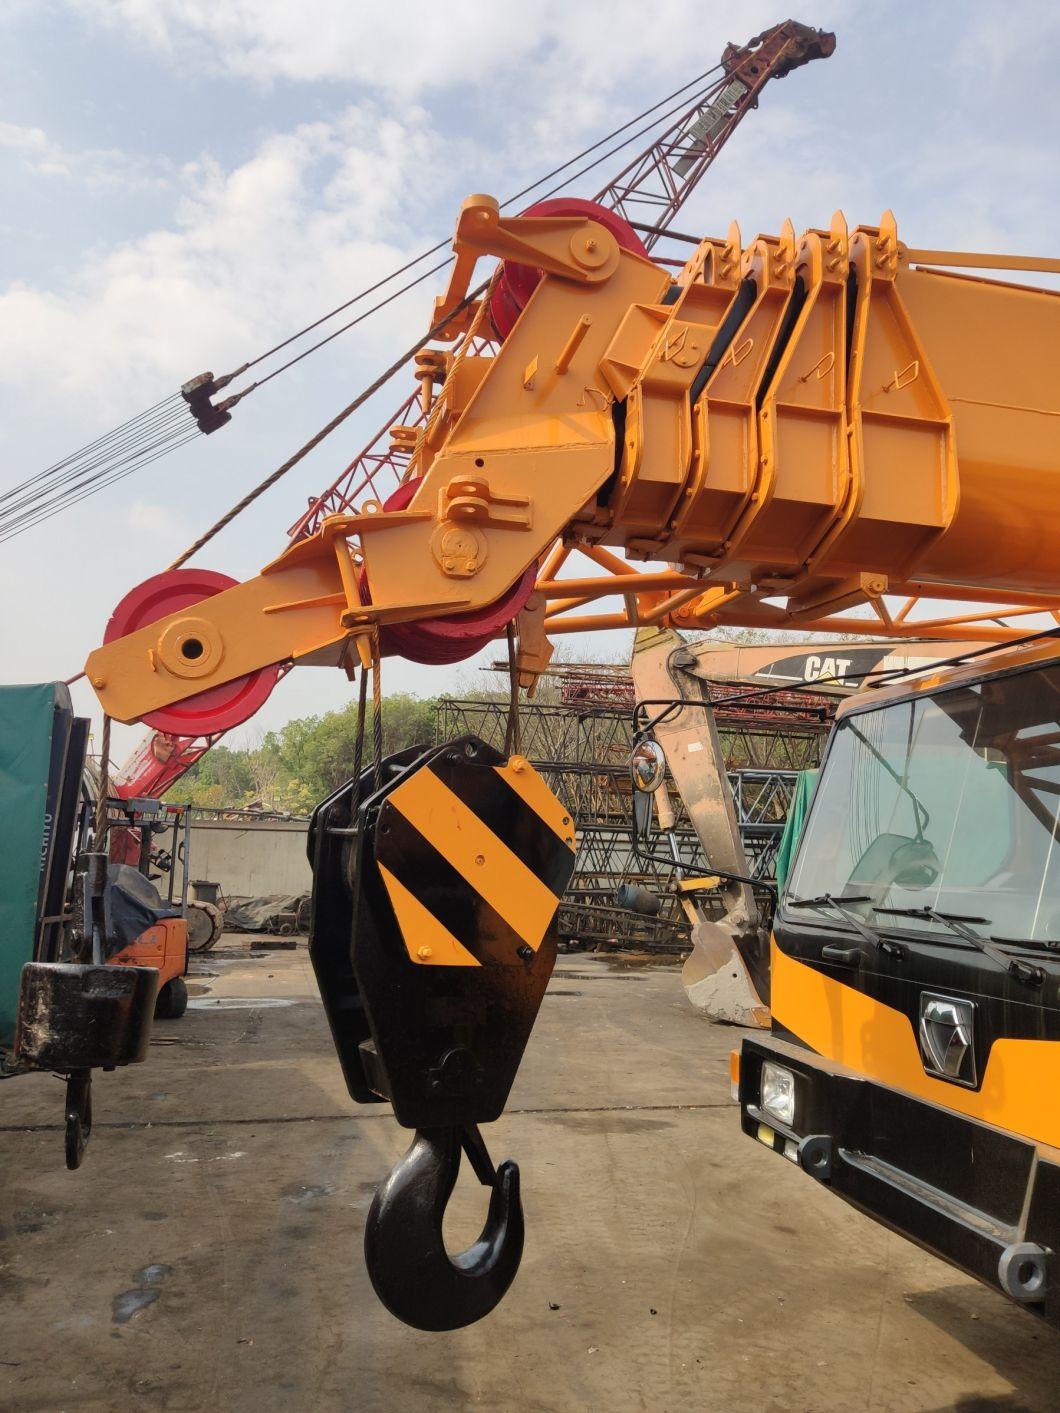 90% New Truck Crane 50 Ton New Arrival in Our Factory! / 50t Qy50K Truck Crane Made in China